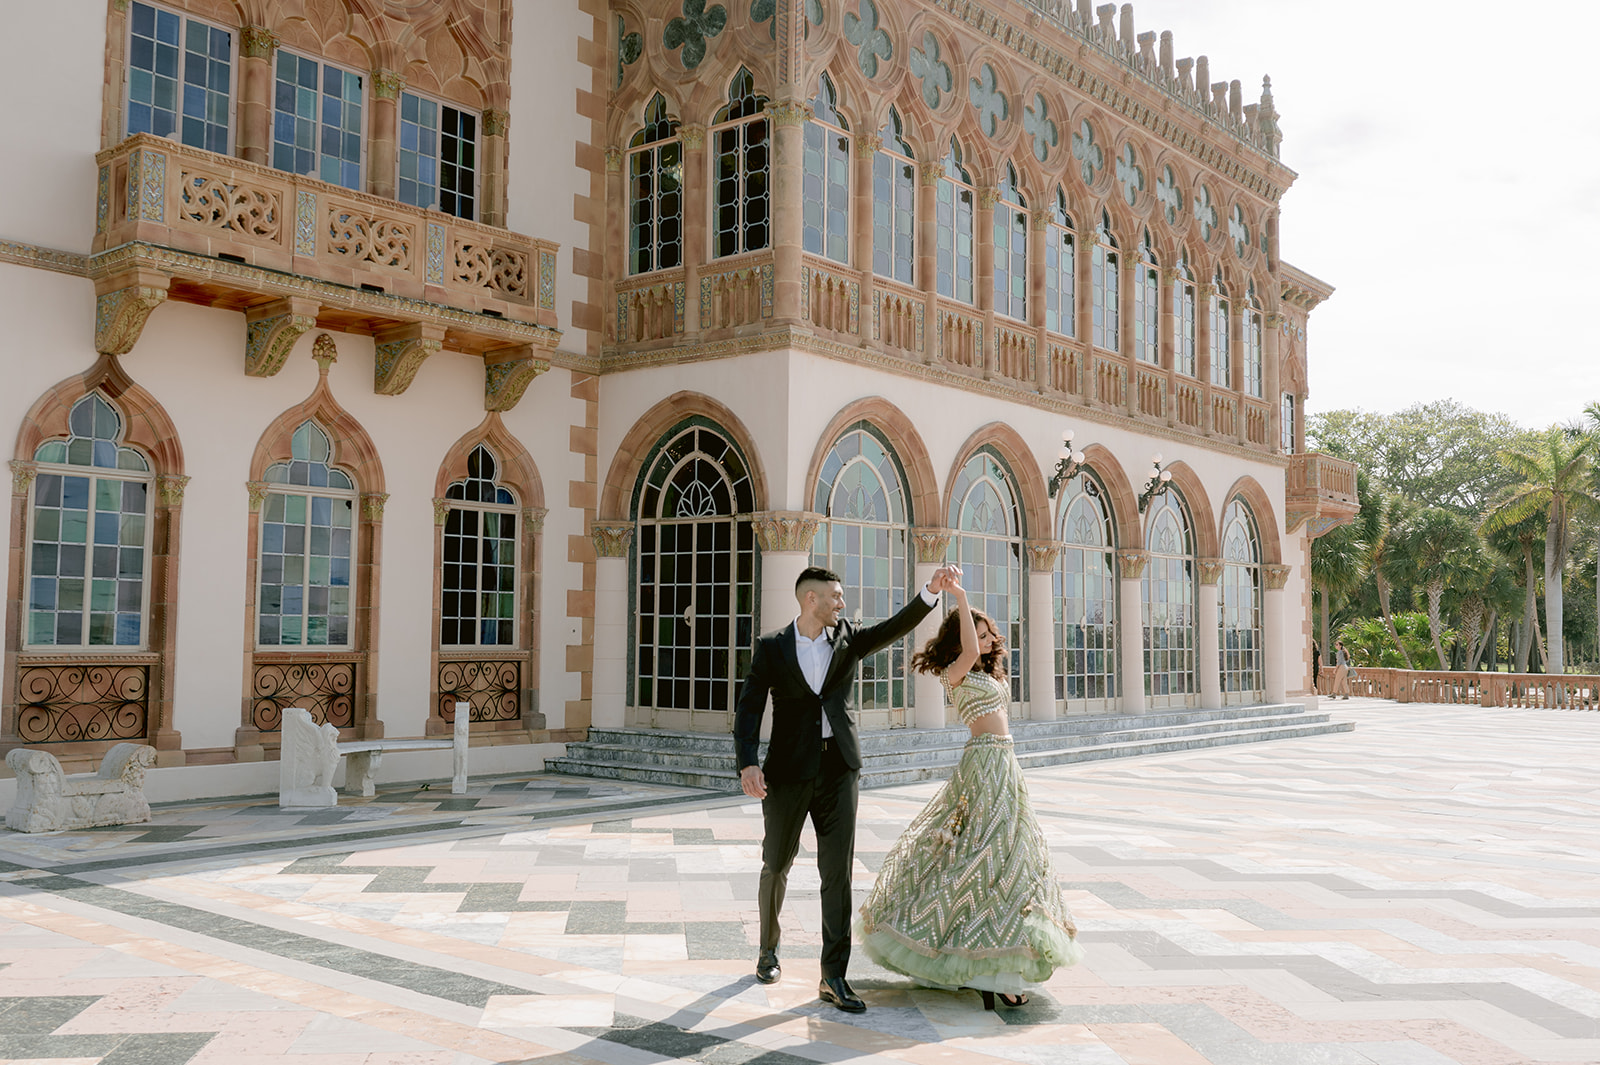 "Ringling Museum engagement shoot captures the elegance and romance of Indian culture"
